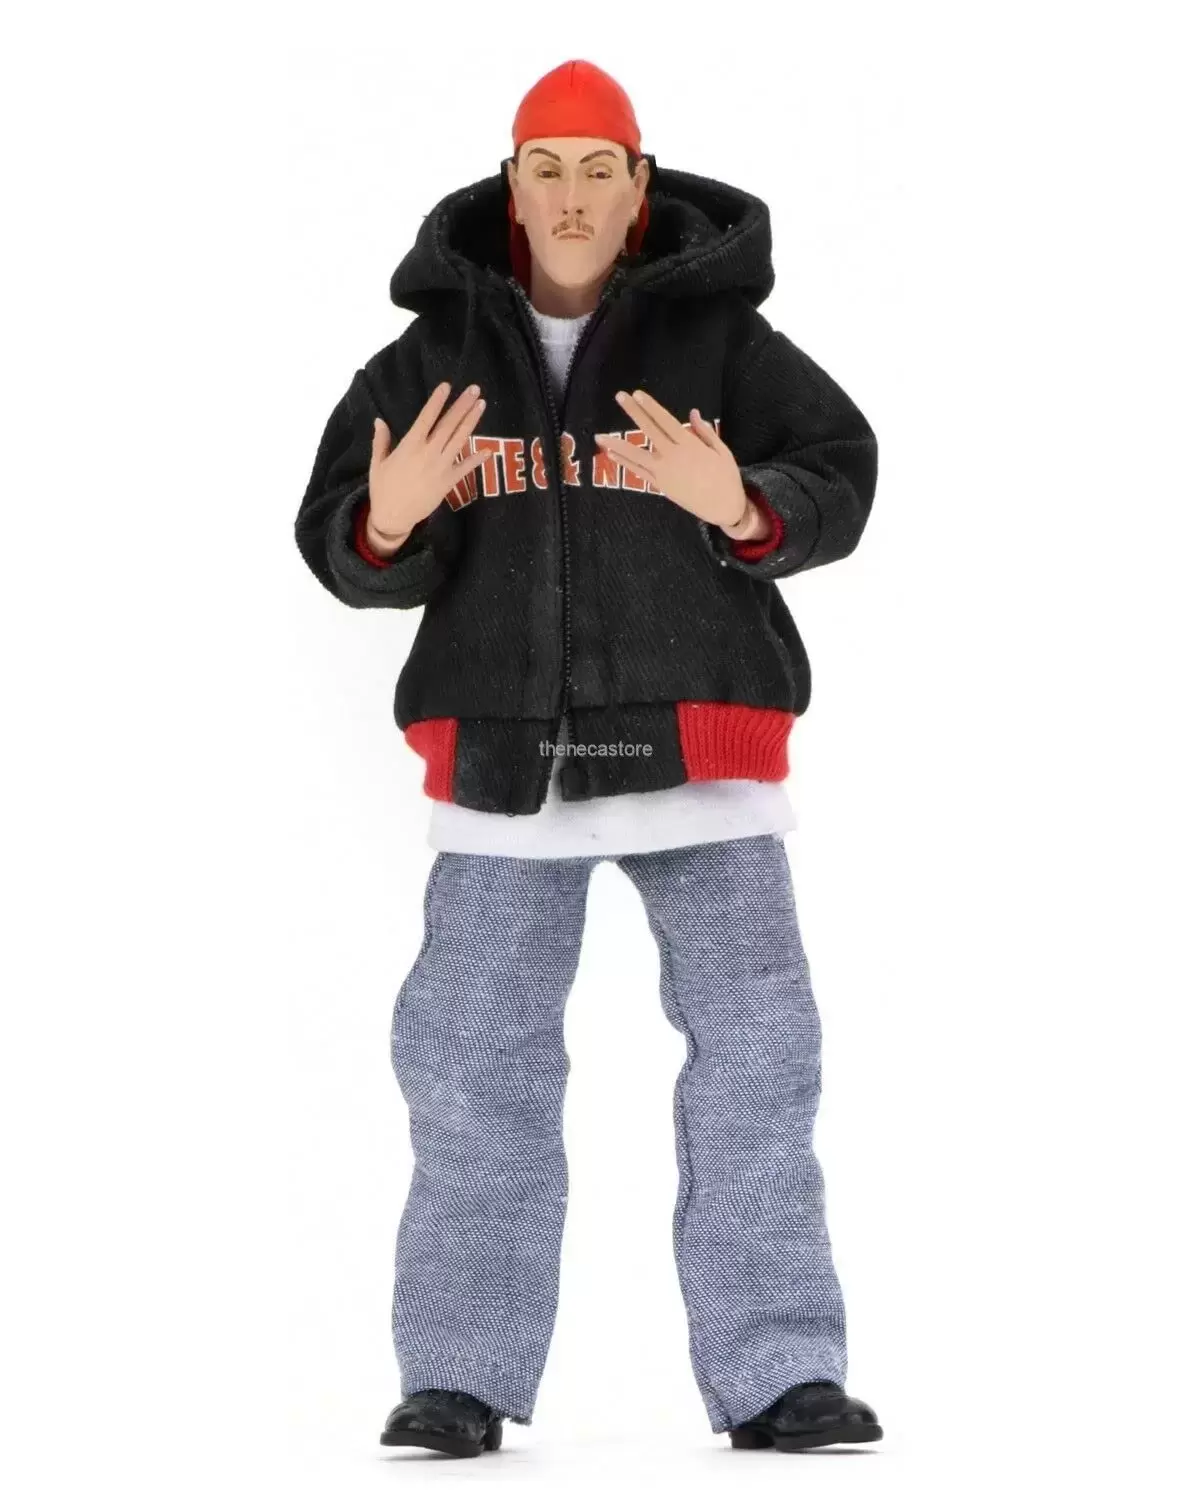 NECA - Weird Al Yankovic - White and Nerdy Clothed